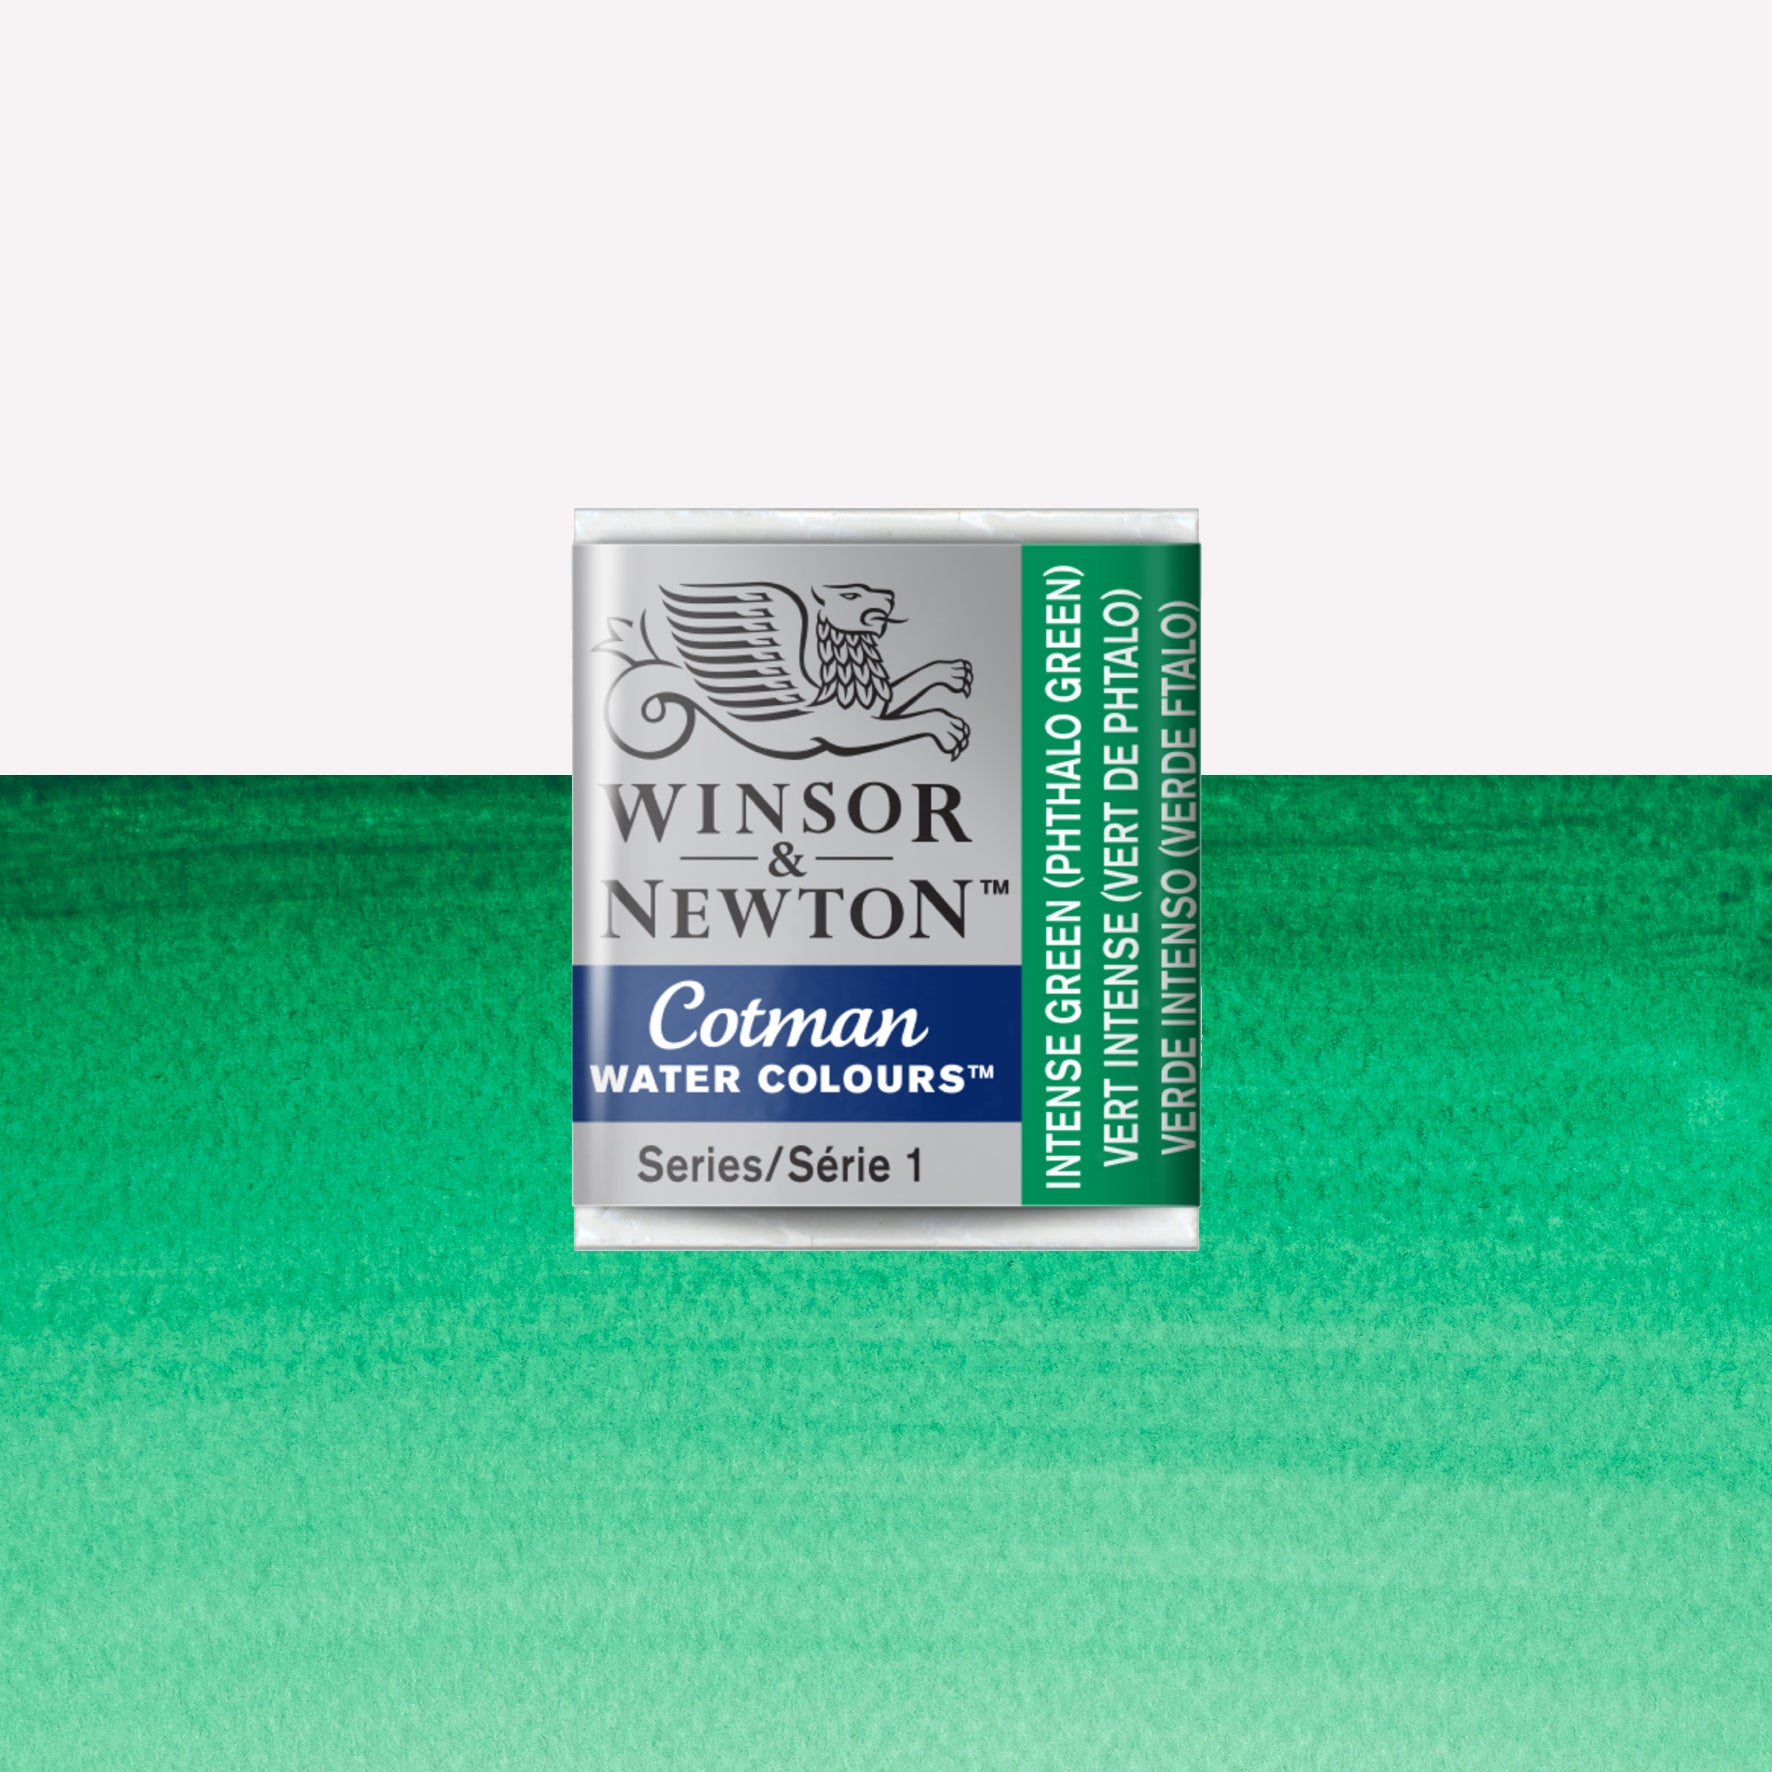 Winsor & Newton Cotman watercolour half pan in the shade Intense (Phthalo) Green over a vibrant colour swatch. These half pans have a solid formula and are packaged in compressed paint cake. 